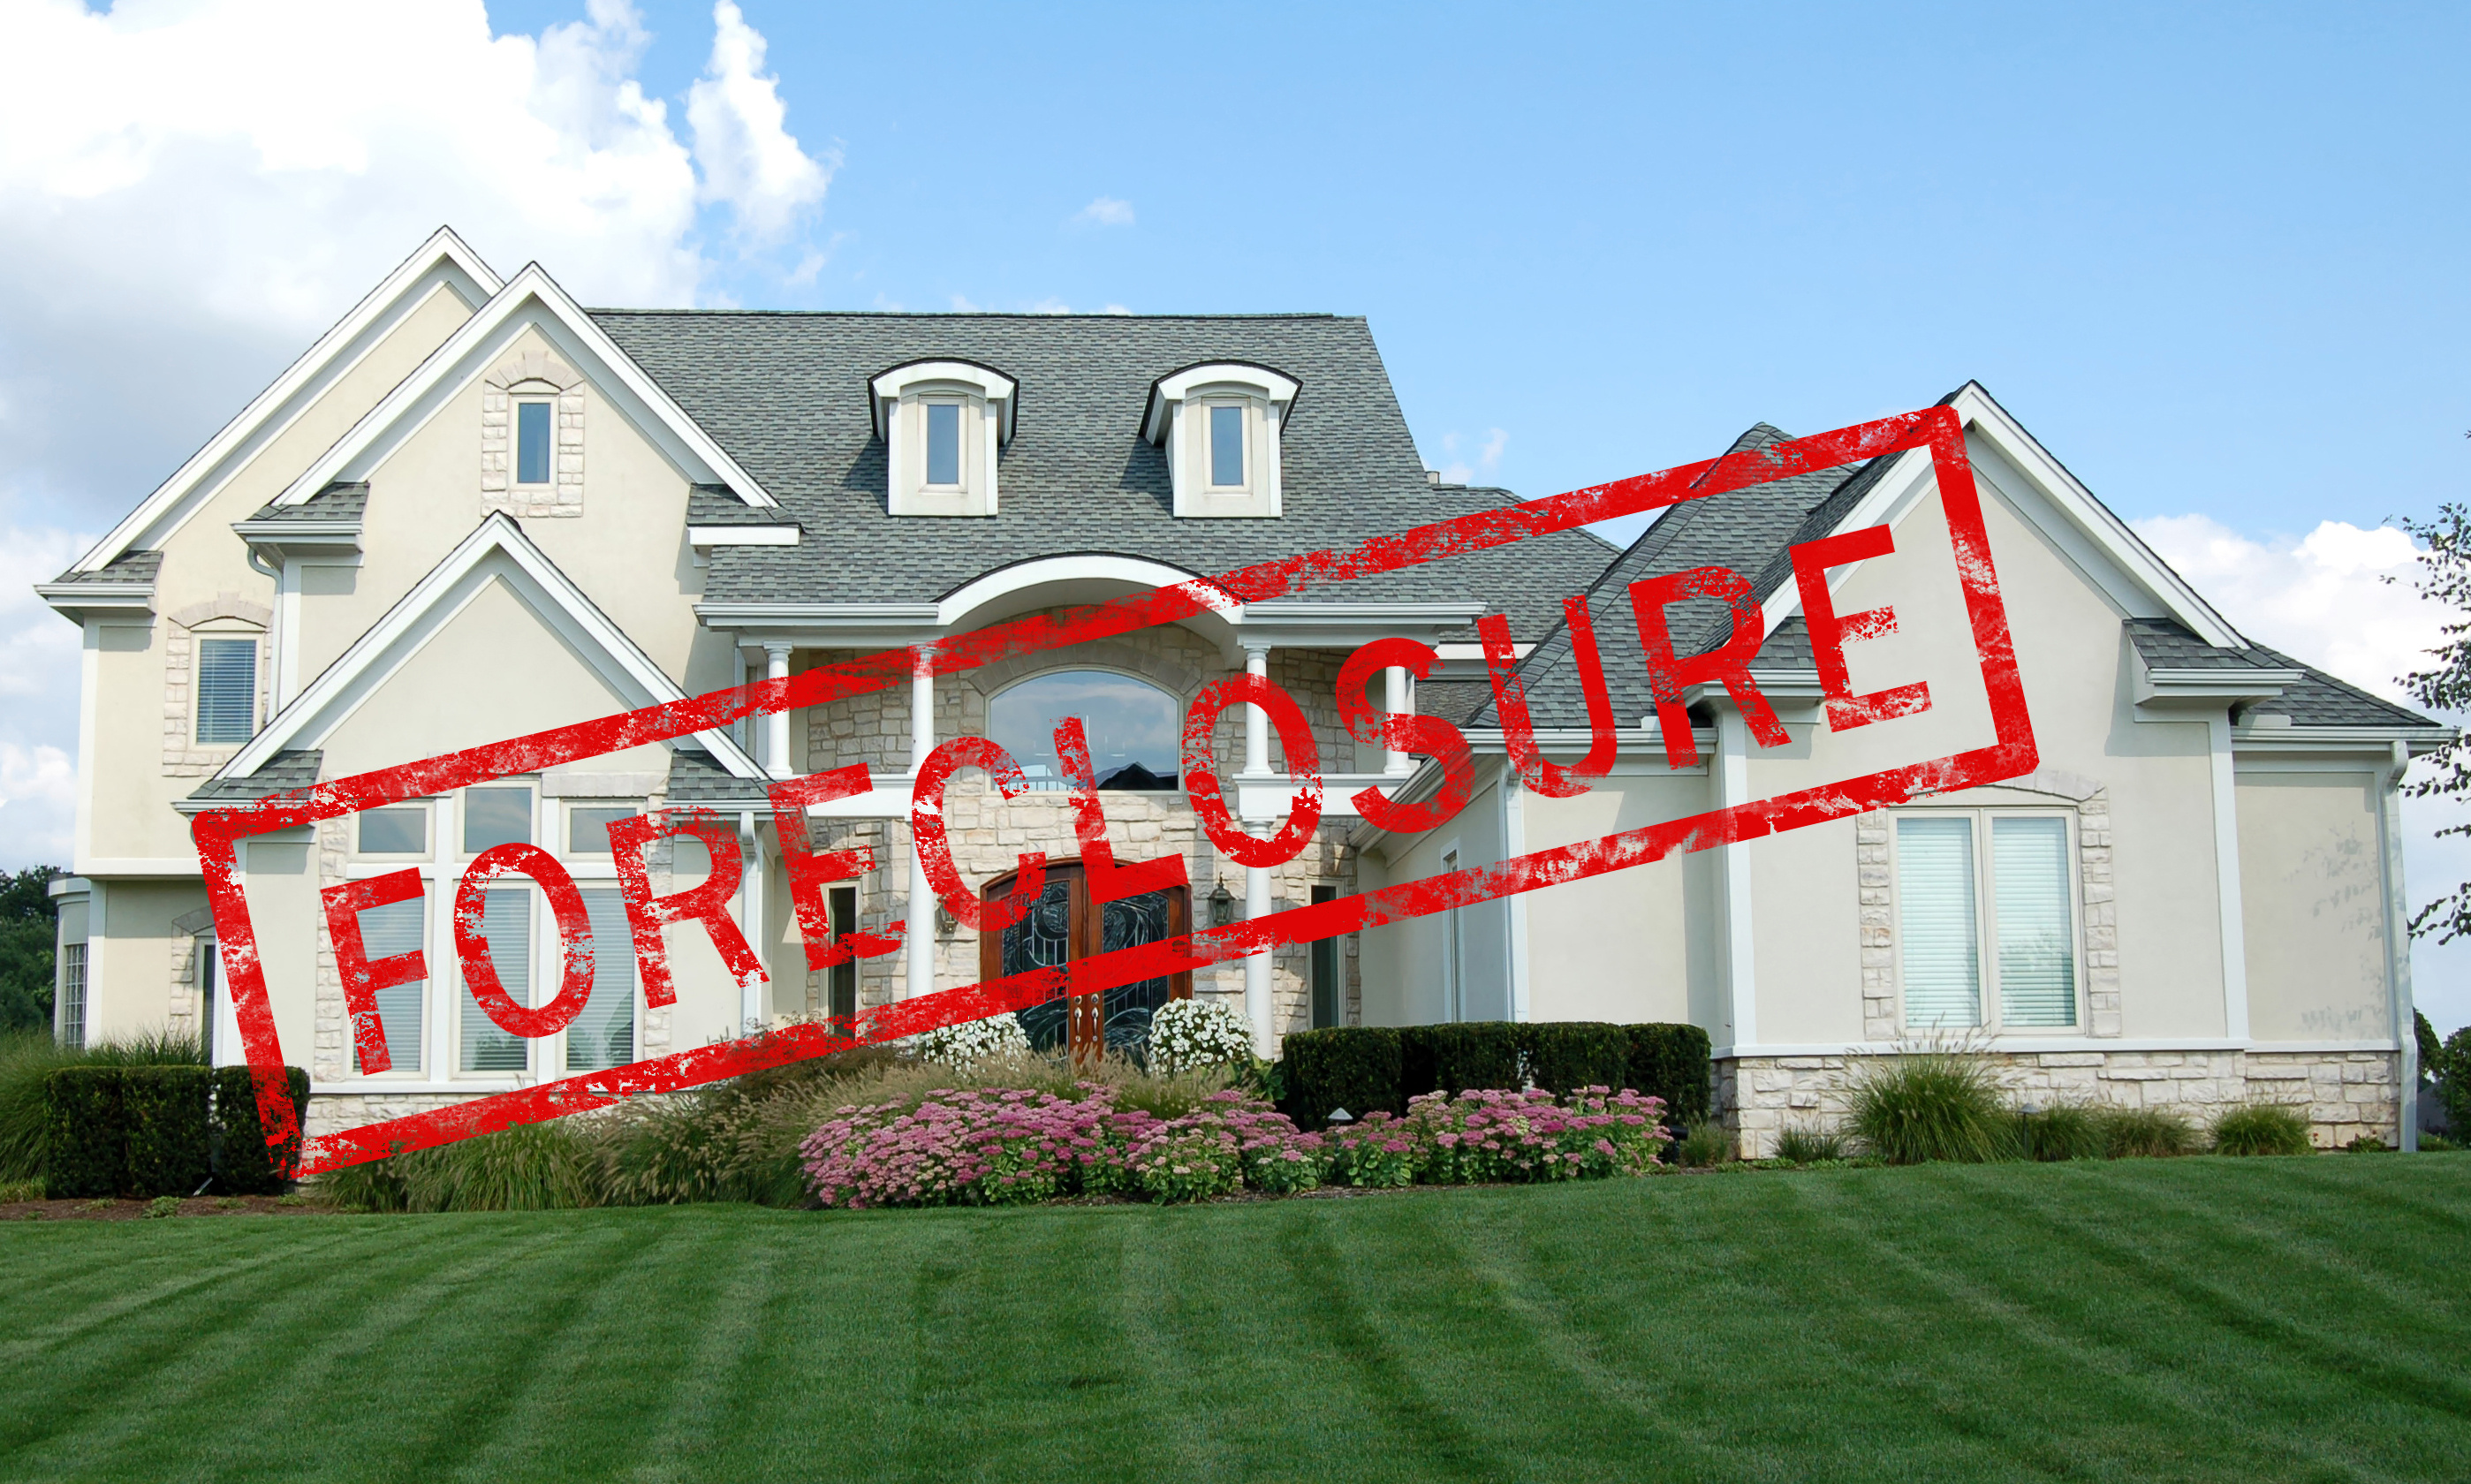 Call Peterson Appraisal Group when you need appraisals regarding Placer foreclosures